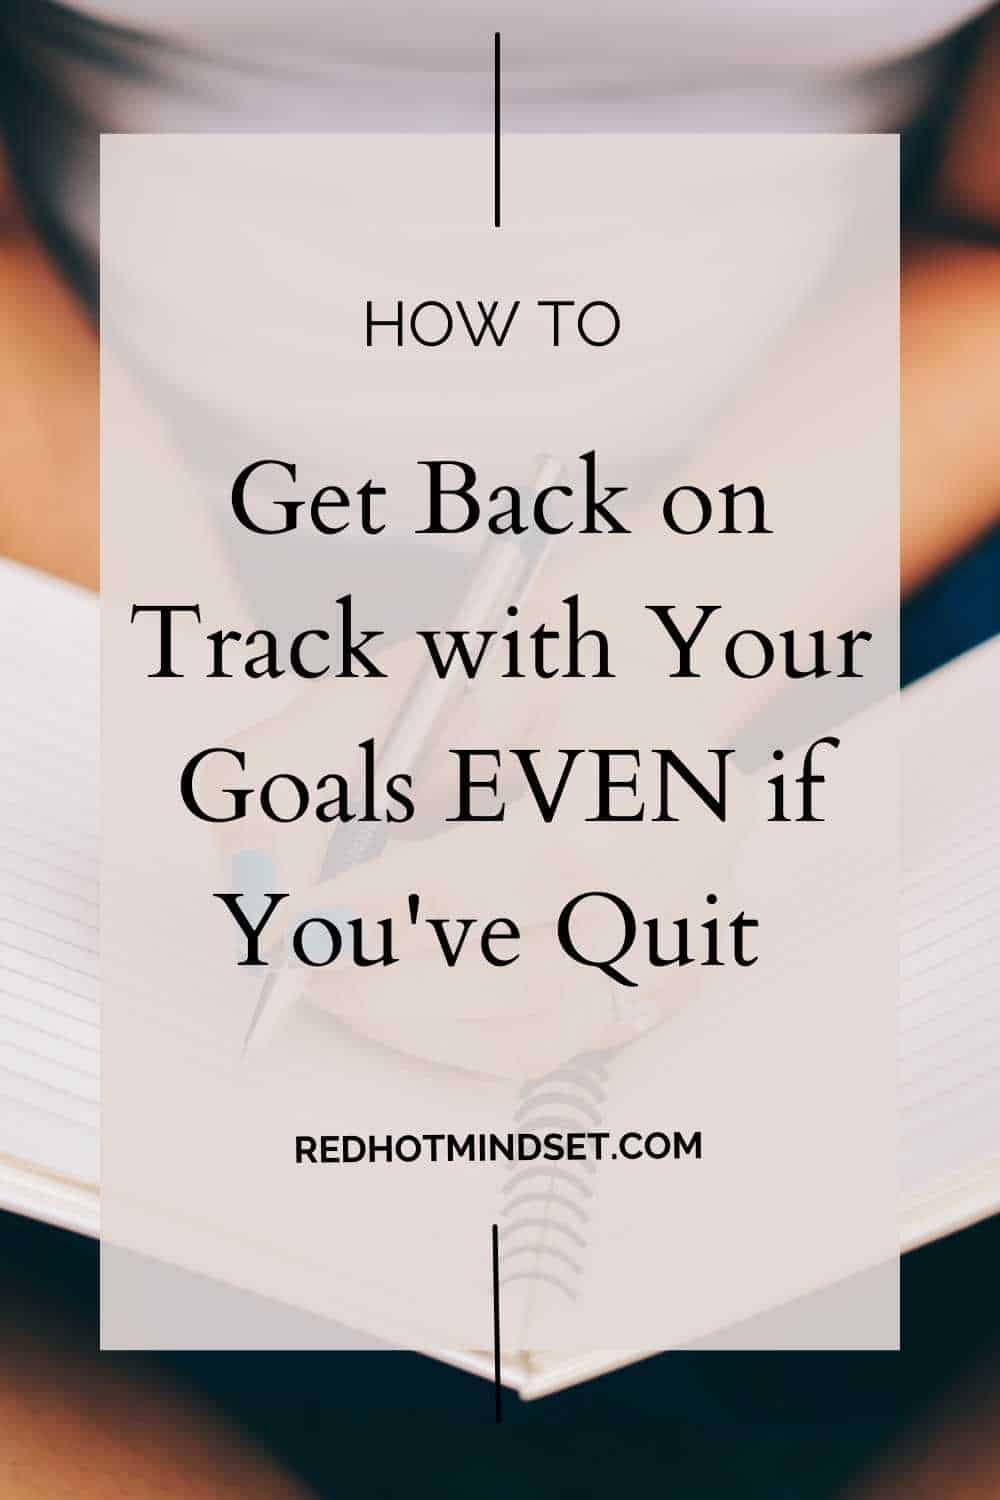 Ep 157 | 3 Simple Steps to Stick to Your Goals and Finish the Year Strong EVEN if You’ve Wanted to Call it Quits